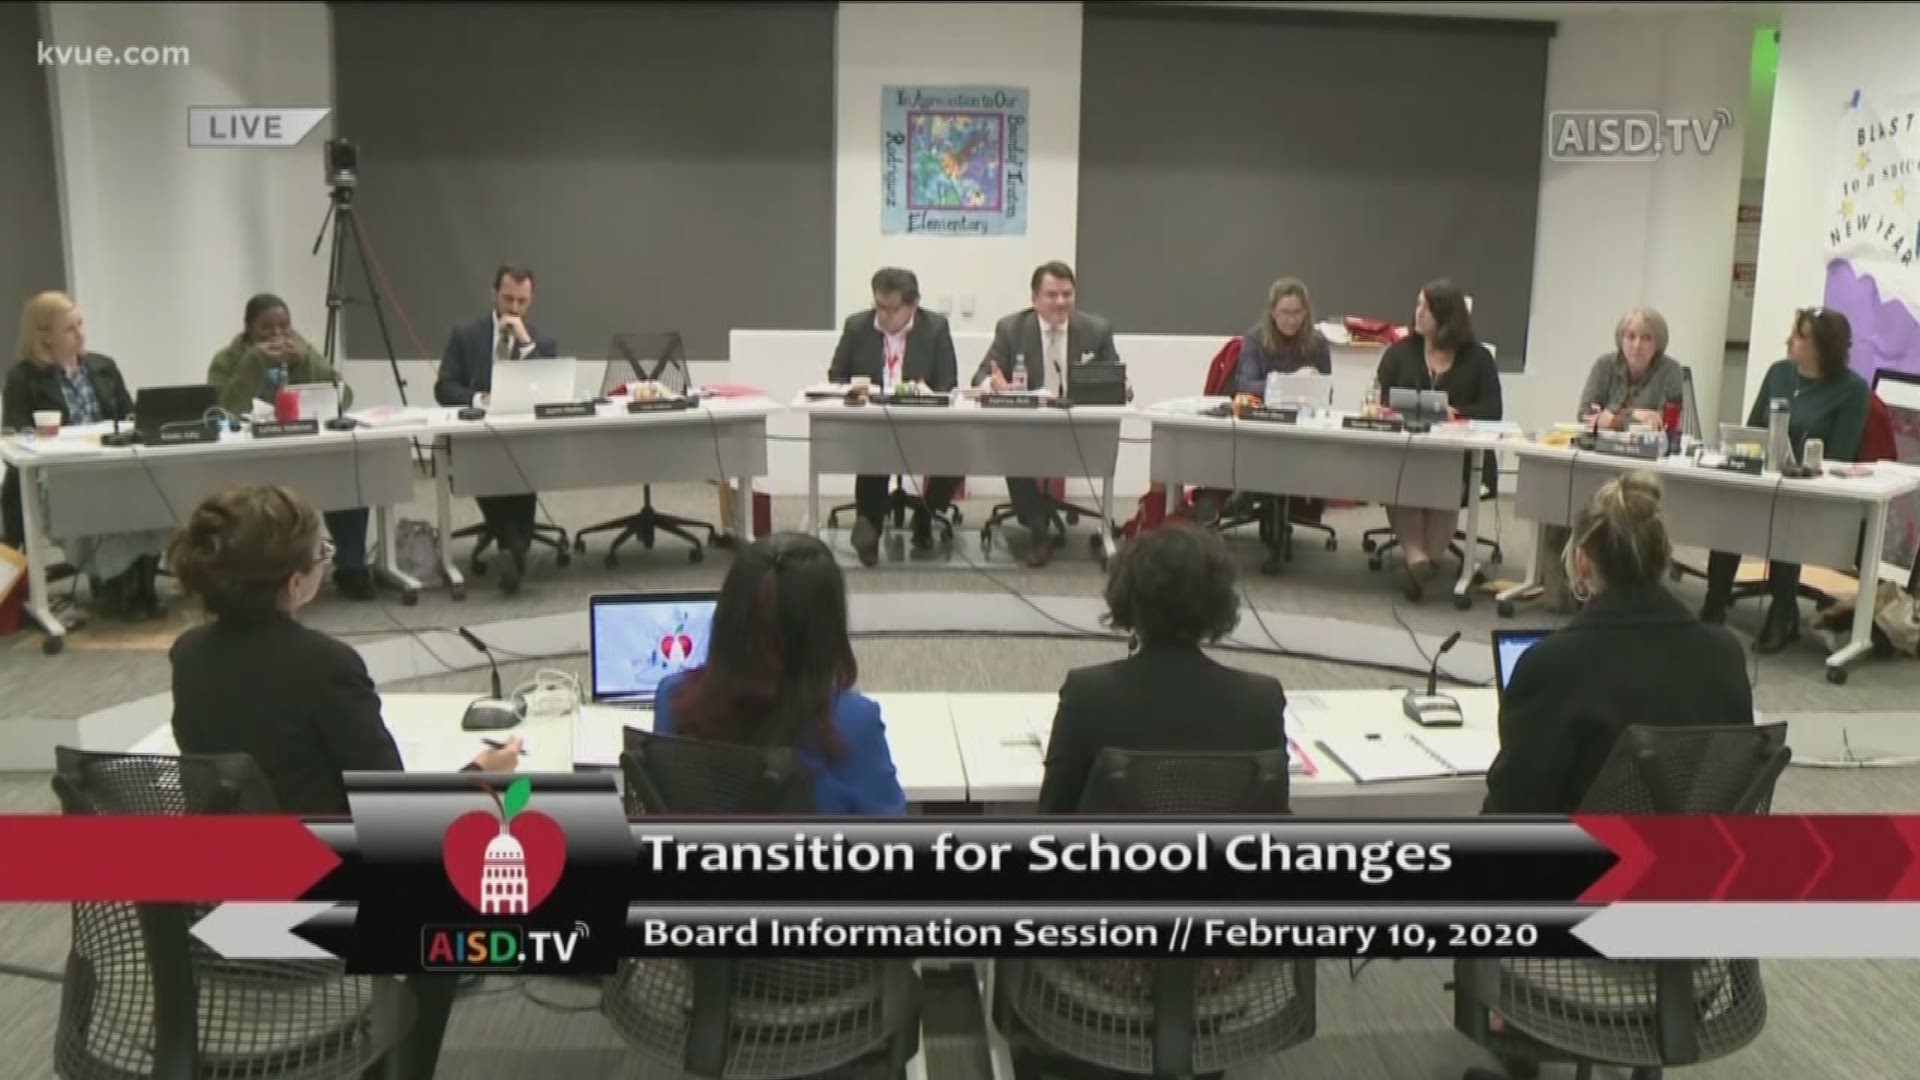 The district created 'School Changes Implementation Teams' or SCITS to help communicate with the community.